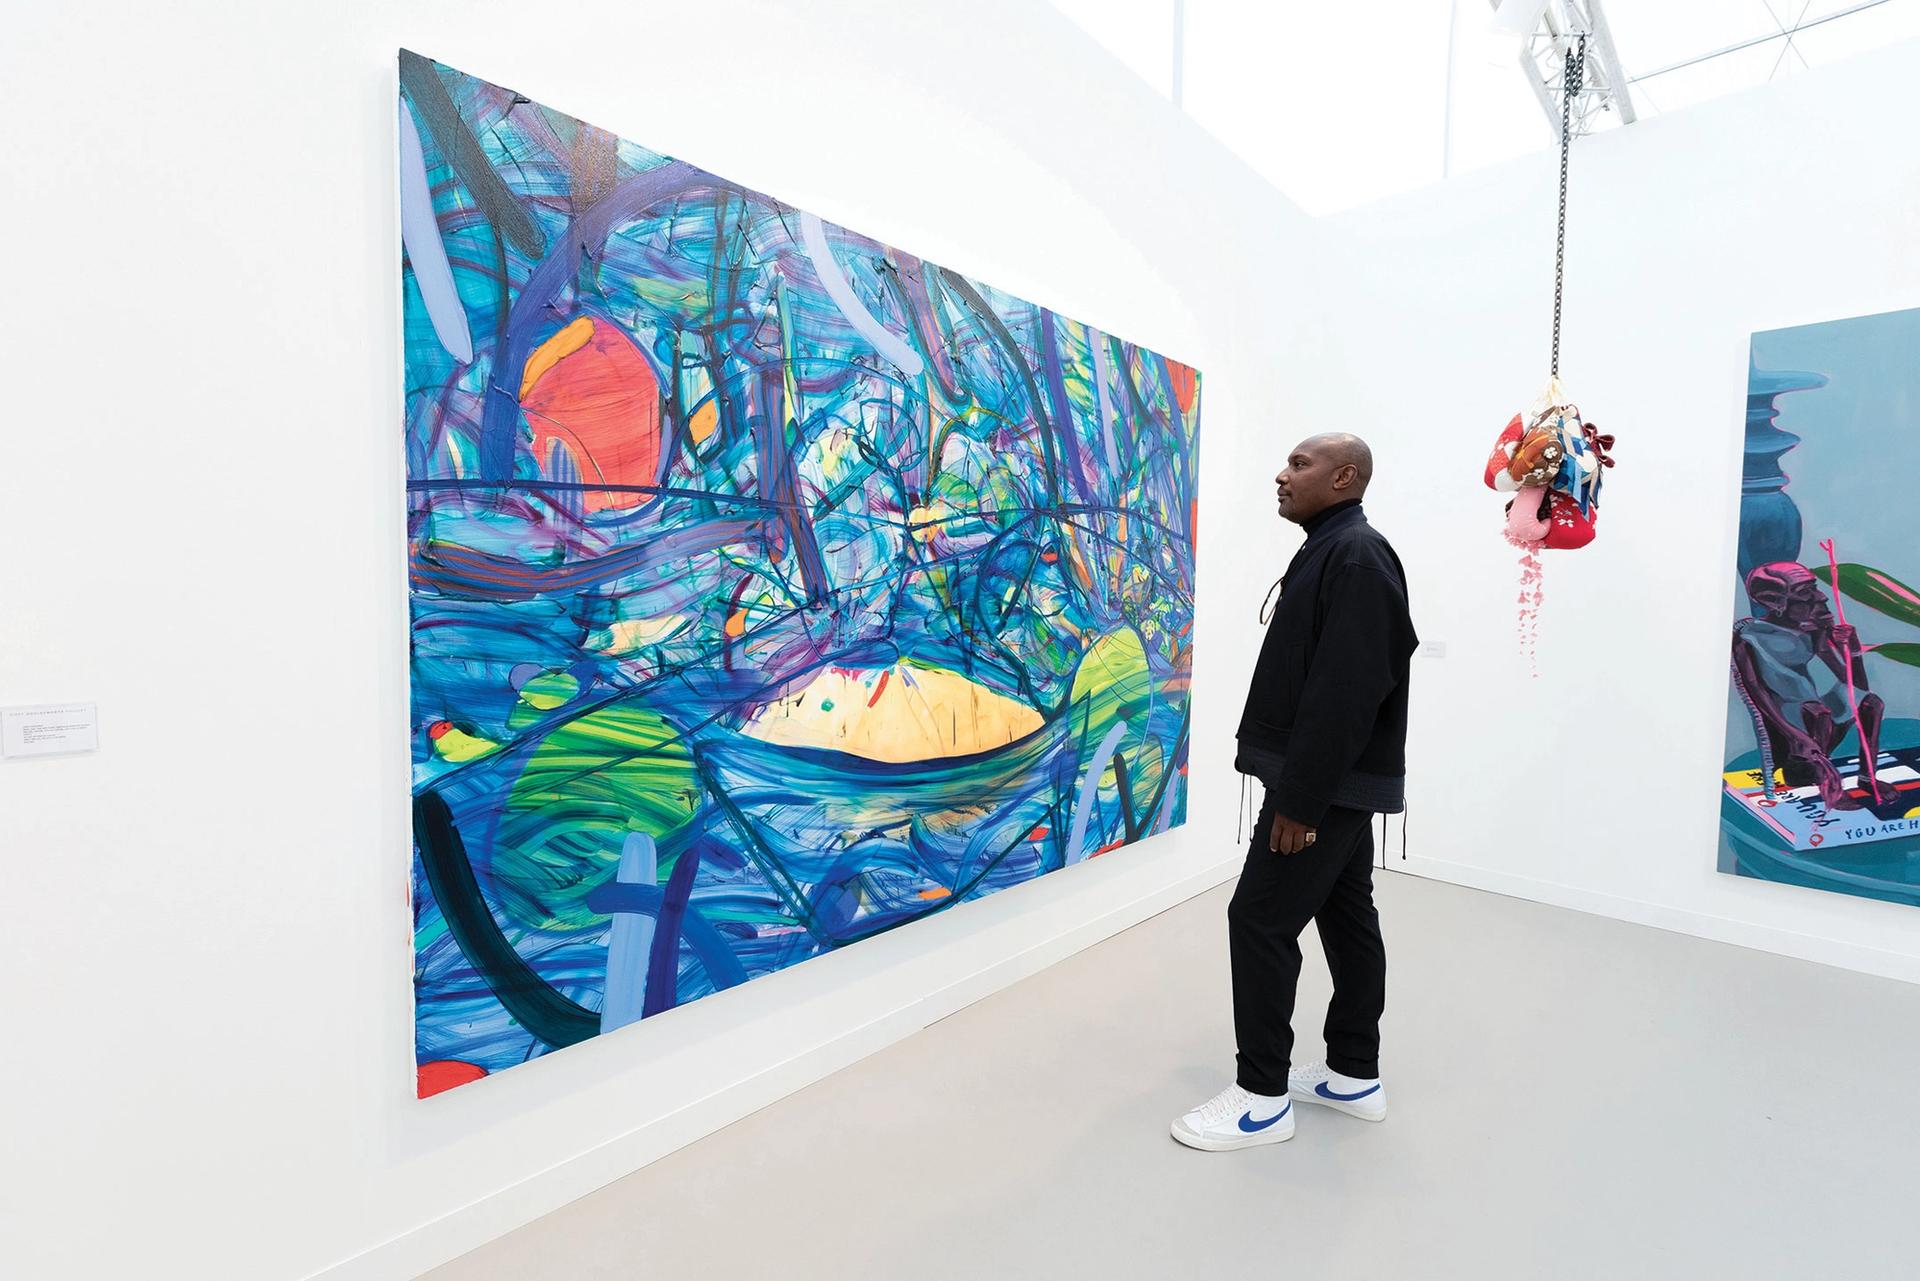 Jadé Fadojutimi’s Row, row, row your boat, Vigorously down the stream, Merrily, merrily, merrily, Life is not a dream (2021) at Frieze London. The London-based artist, who has not yet turned 30, has seen phenomenal success, with a work selling for £1.1m this week, and a solo museum show opening later this year David Owens